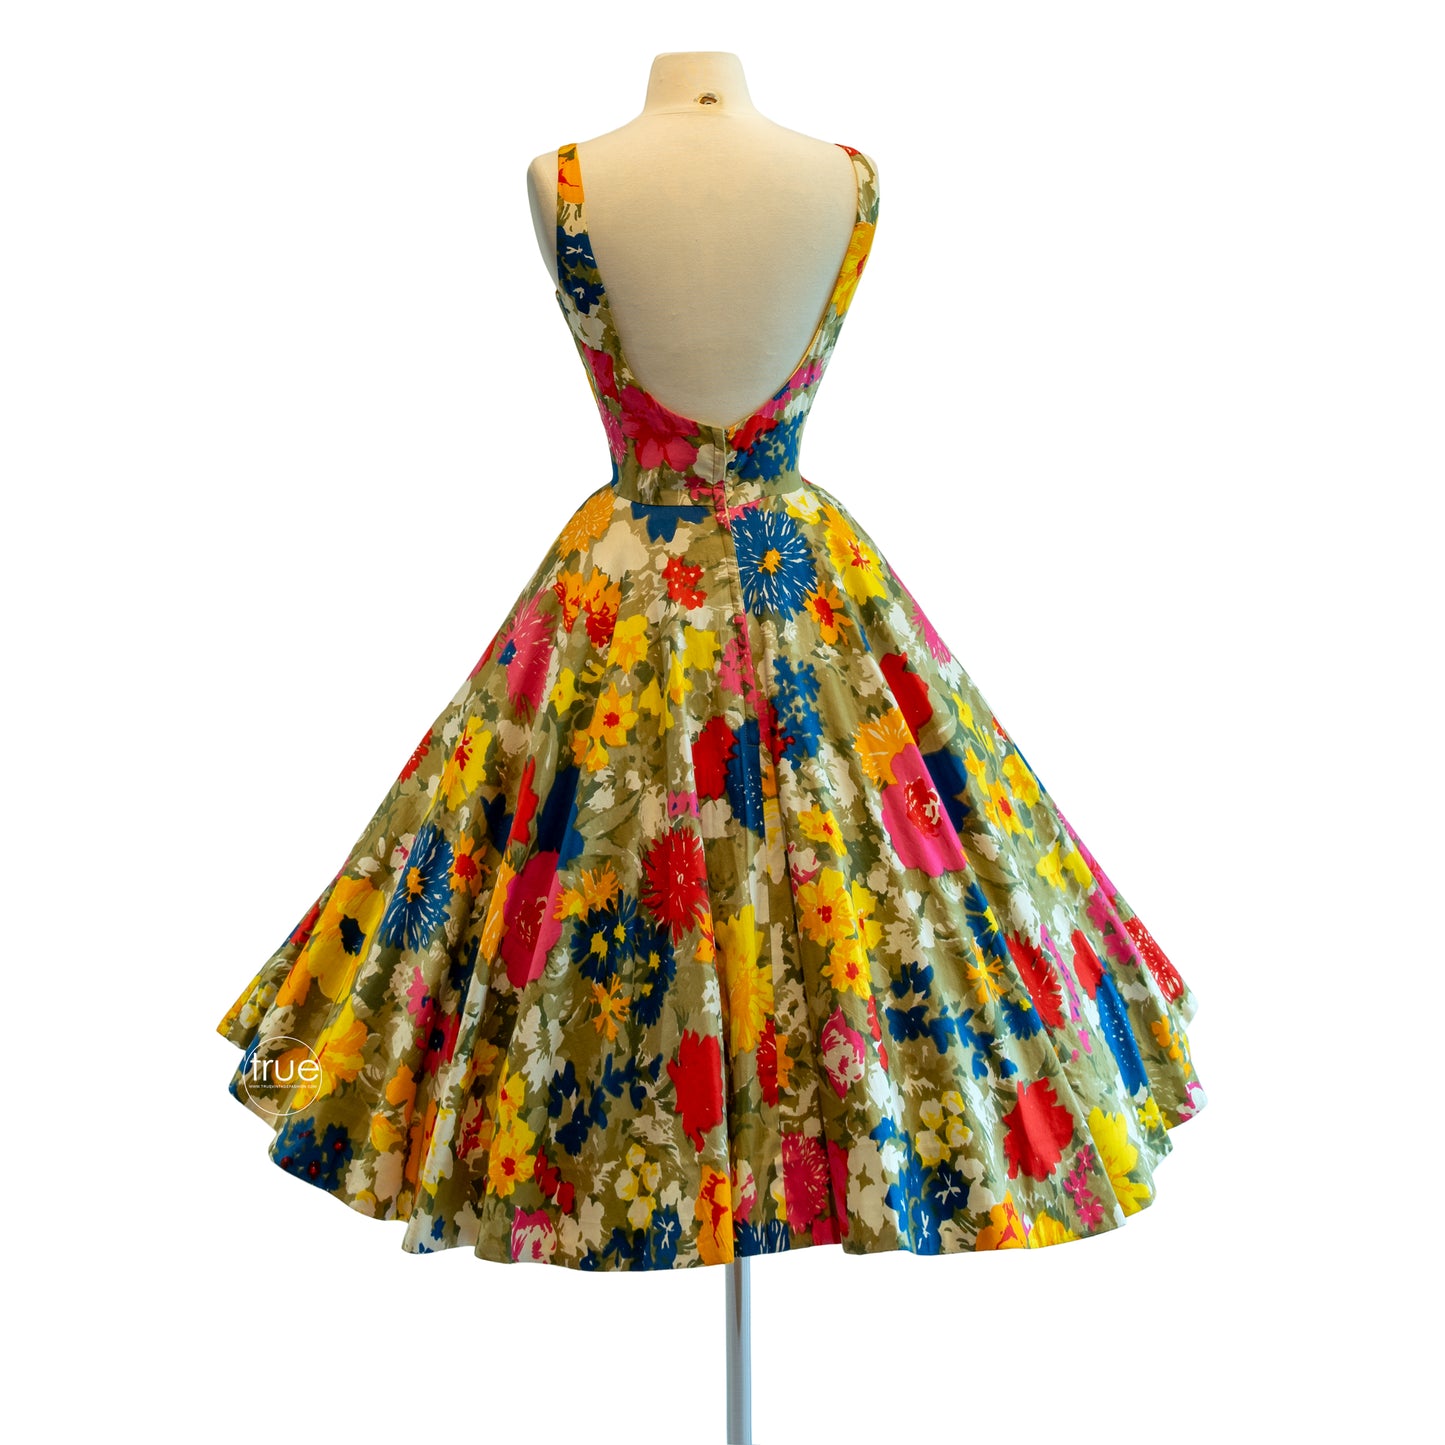 vintage 1950's dress ...gorgeous MARYON's fifth avenue spring floral explosion circle skirt dress